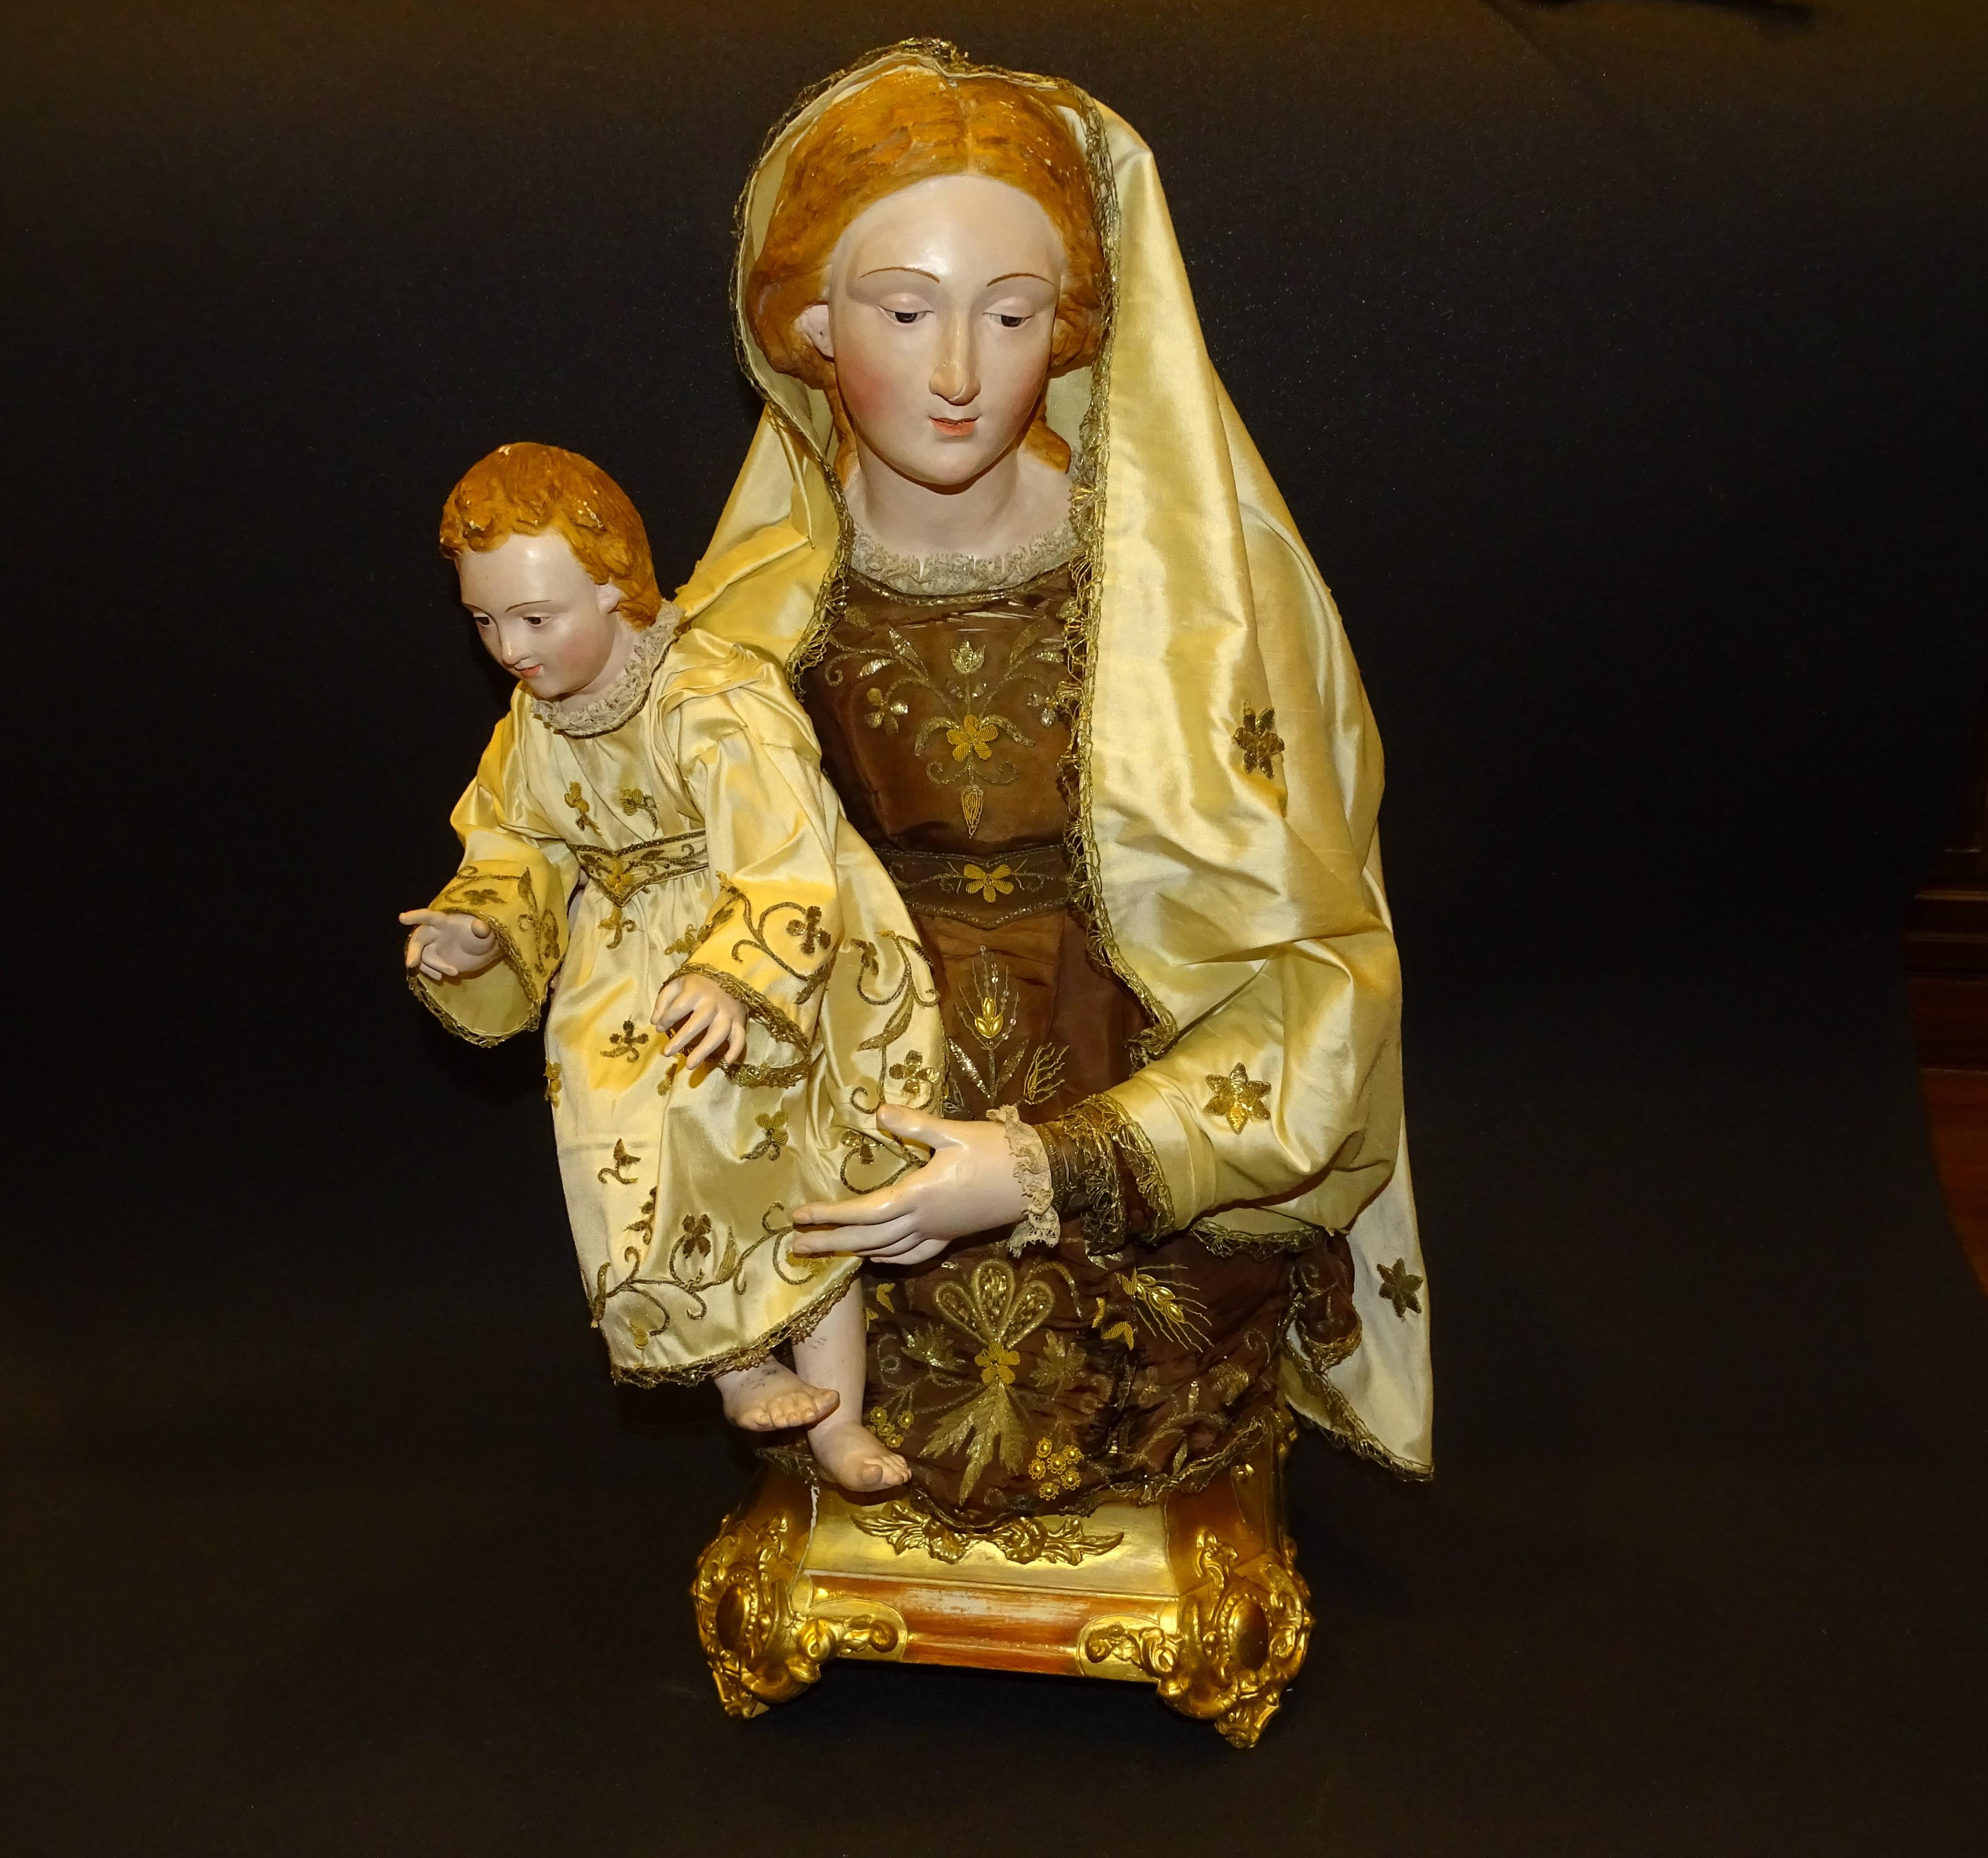 Neapolitan Scupture of a Virgin with the Child Jesus, Nativity